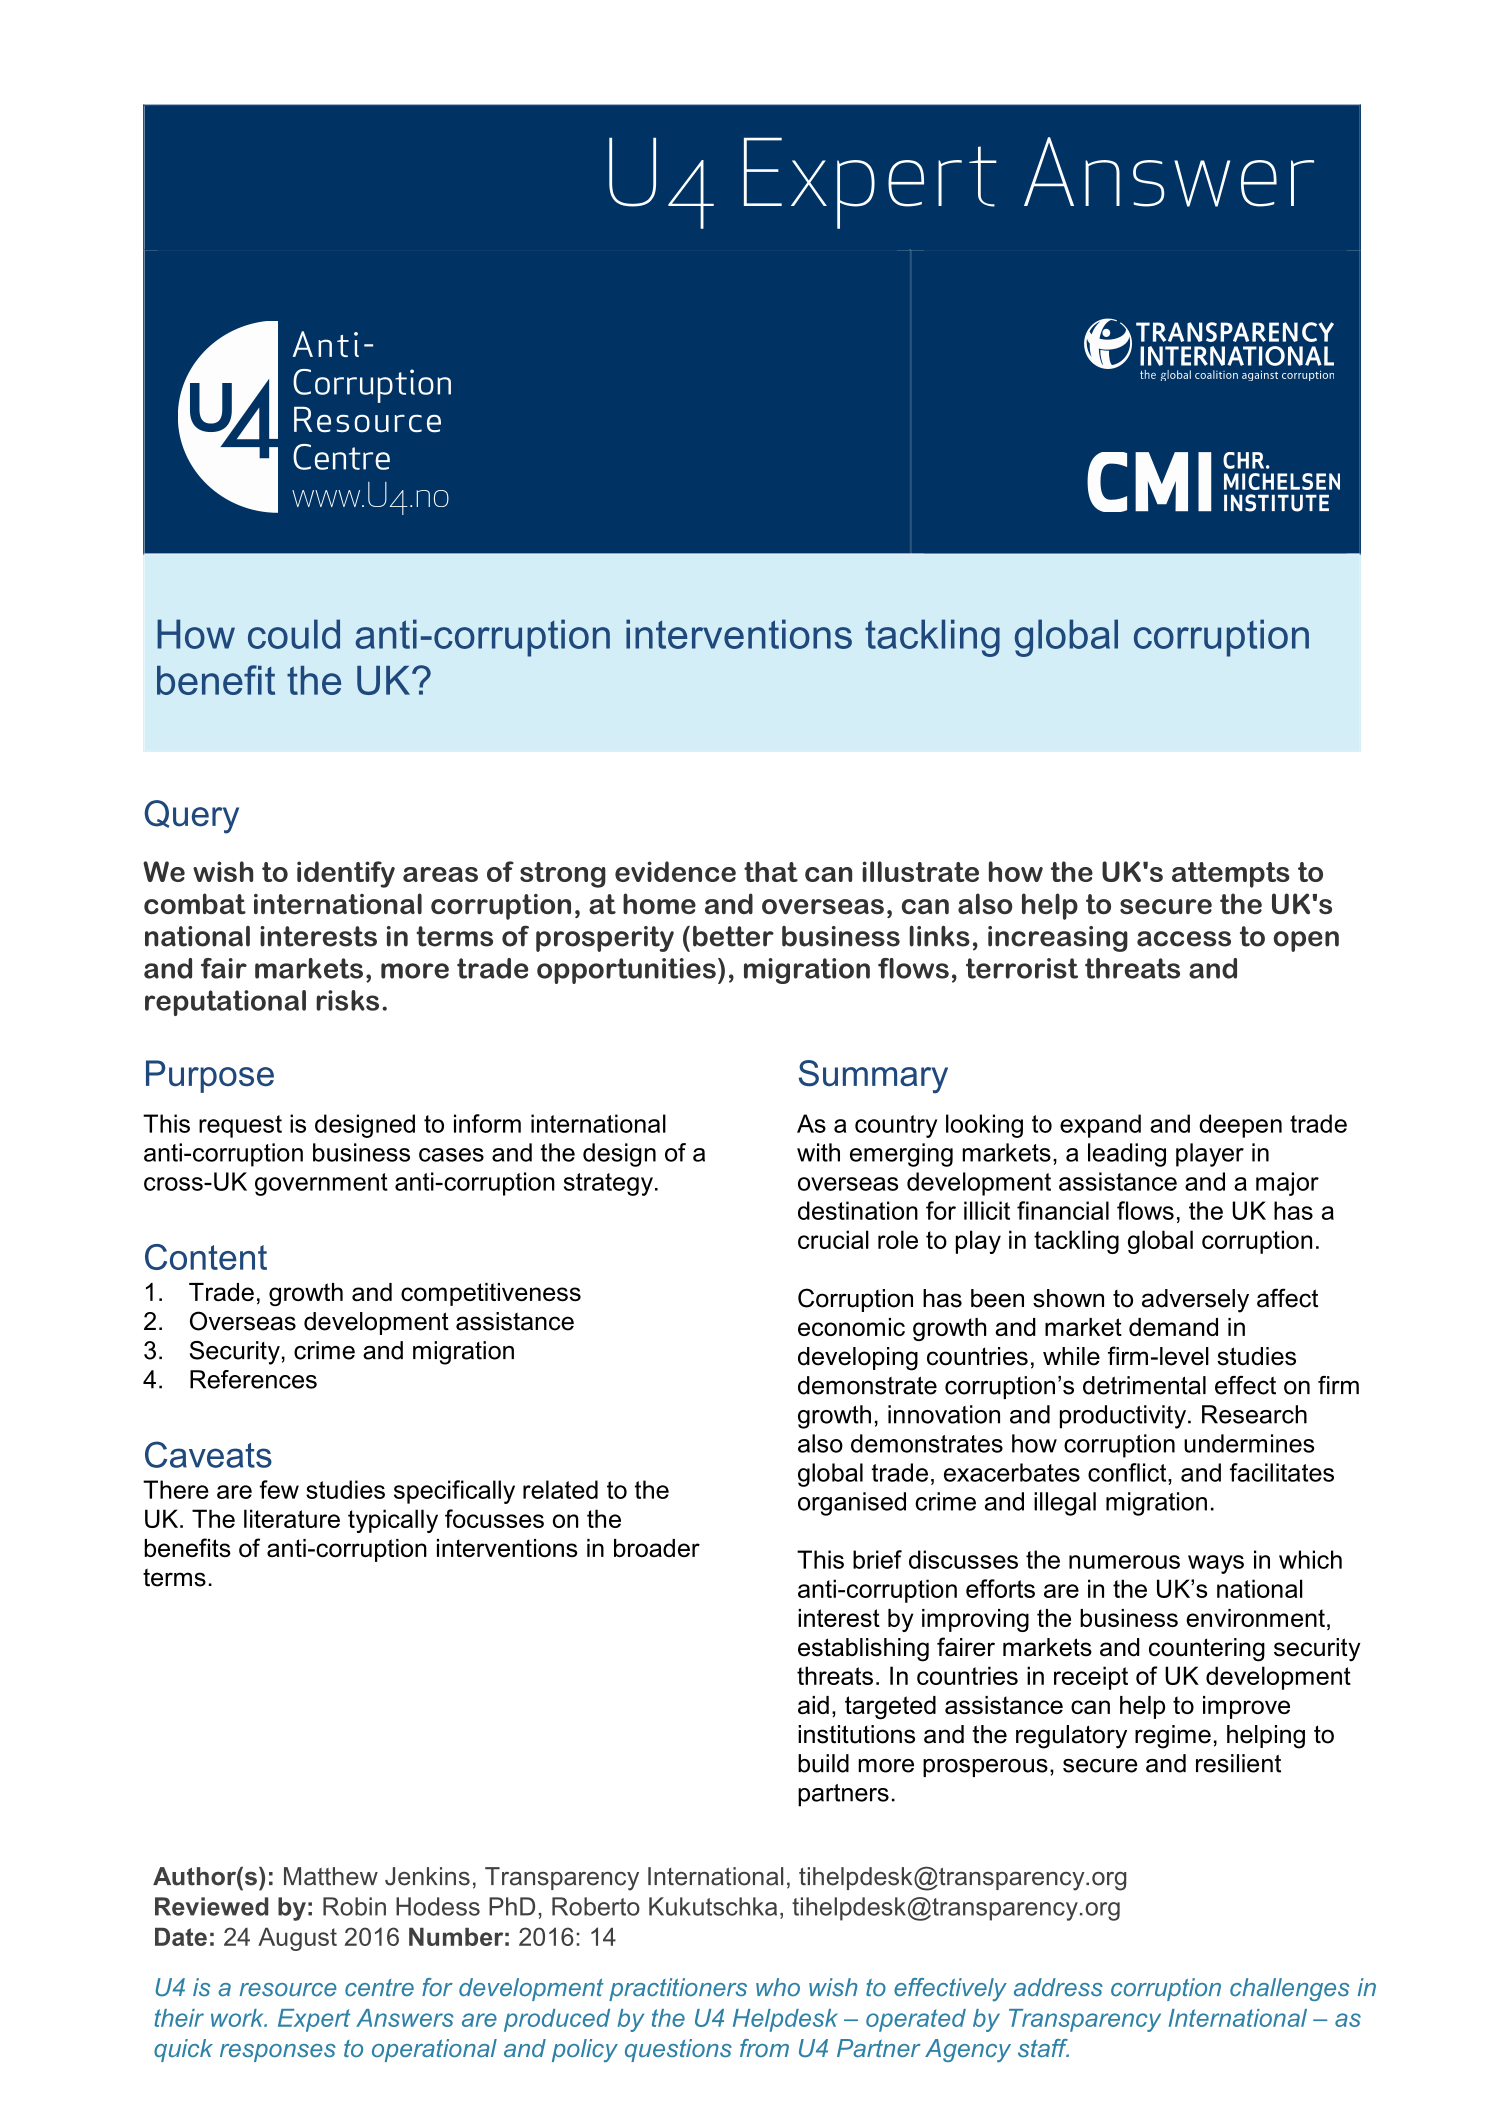 How could anti-corruption interventions tackling global corruption benefit the UK?